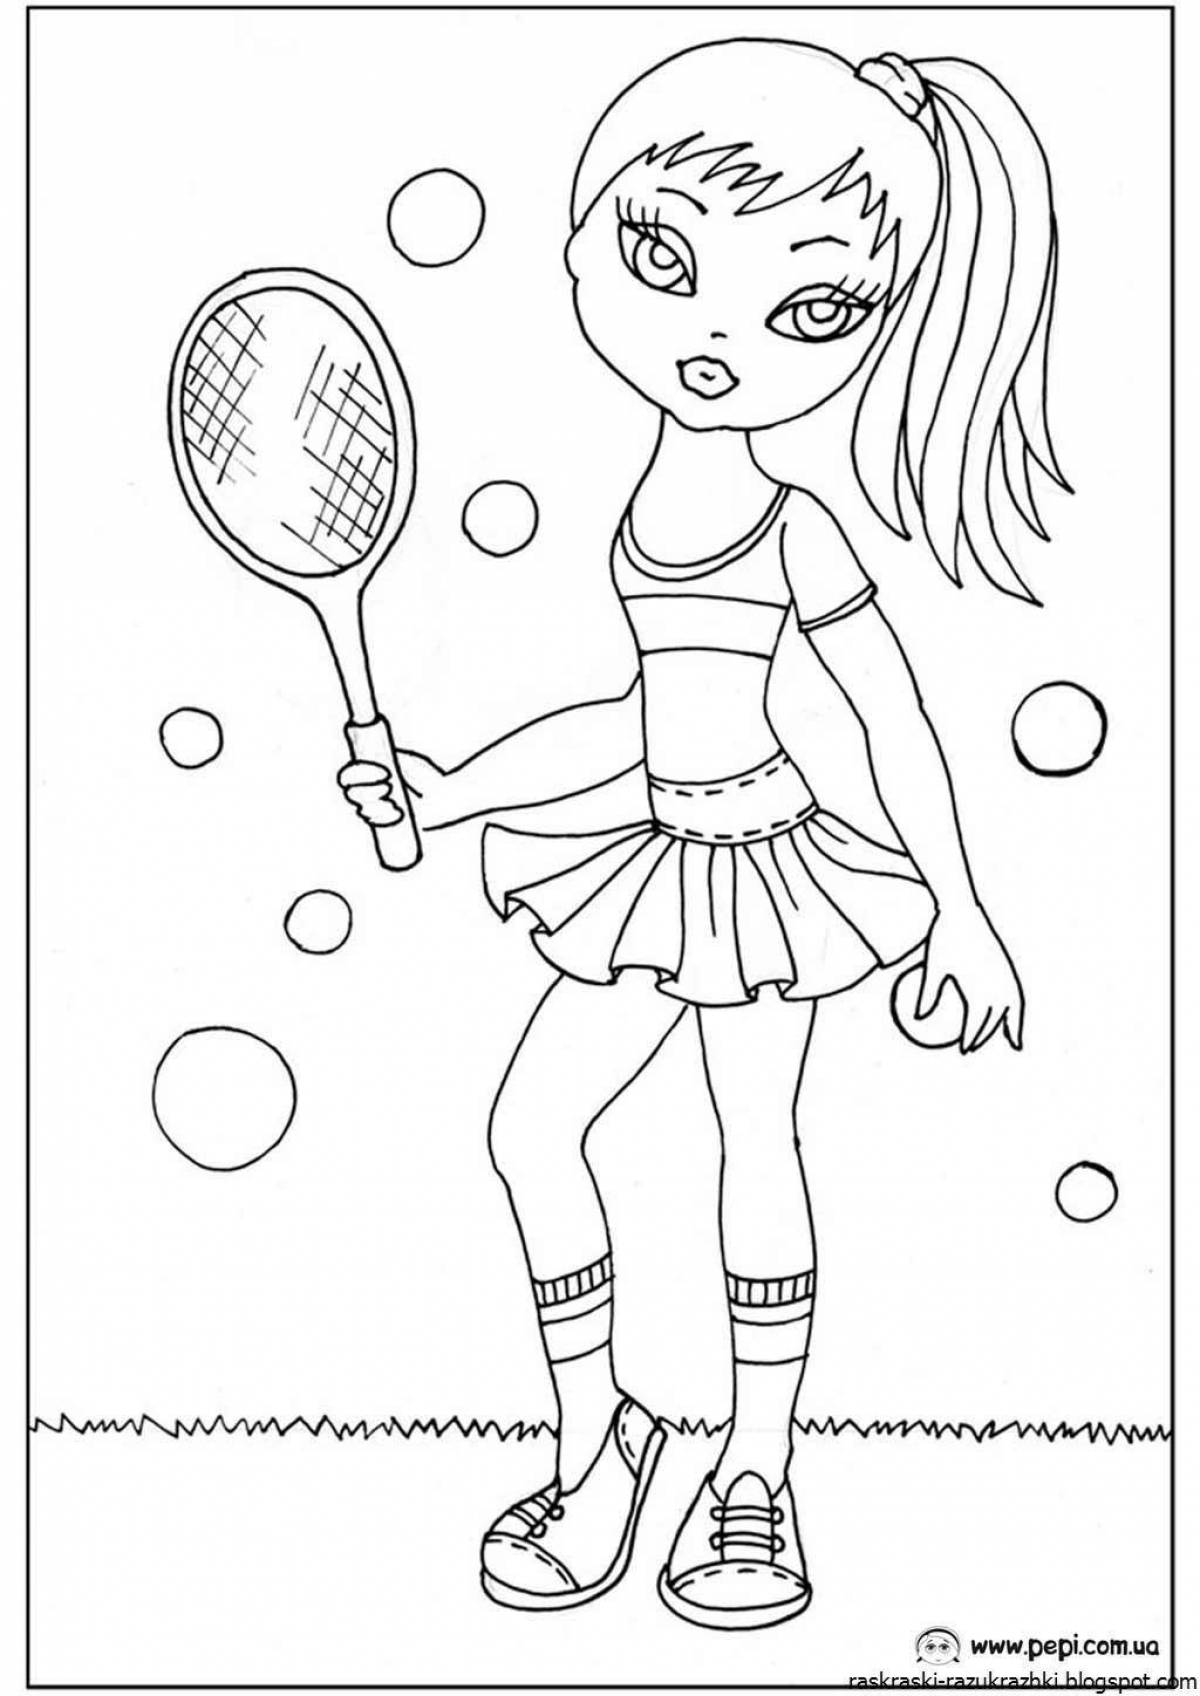 Fantastic sports coloring book for kids